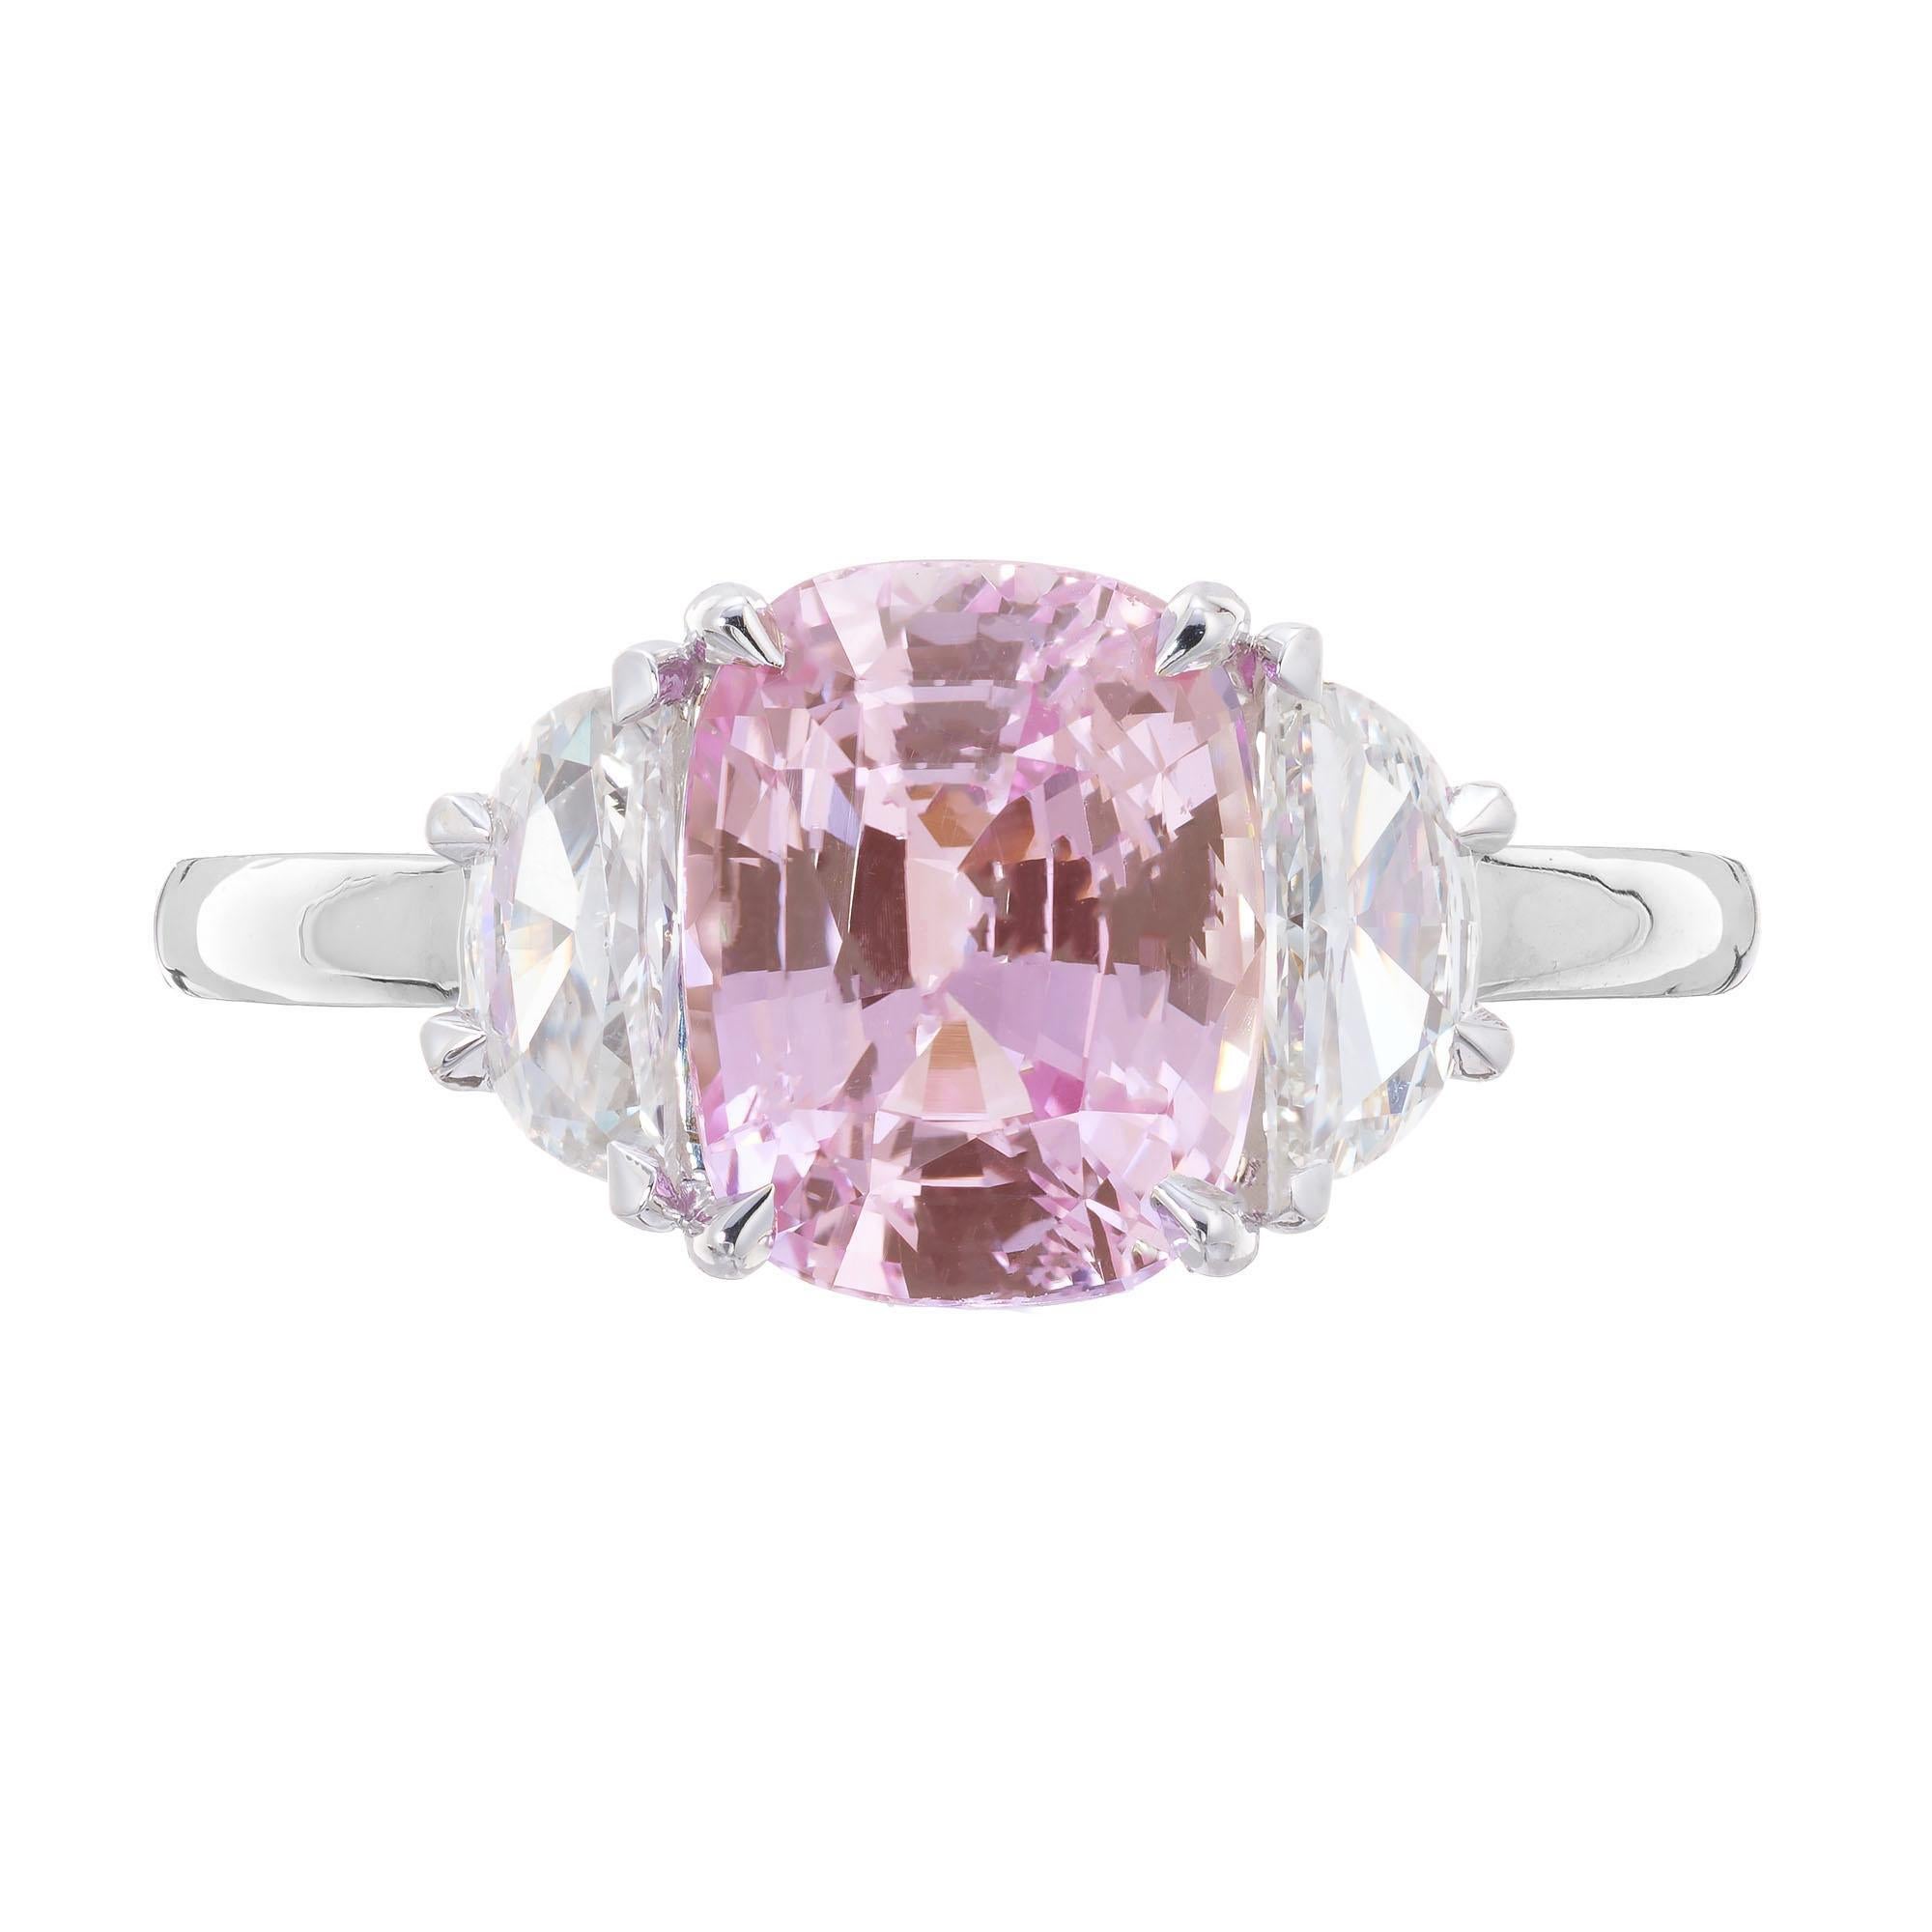 Sapphire and diamond engagement ring. GIA certified 3.50 Carat natural cushion cut pink sapphire in a platinum three-stone setting with 2 halfmoon side diamonds. The pink sapphire is from a 1920's estate. Designed and crafted in the Peter Suchy